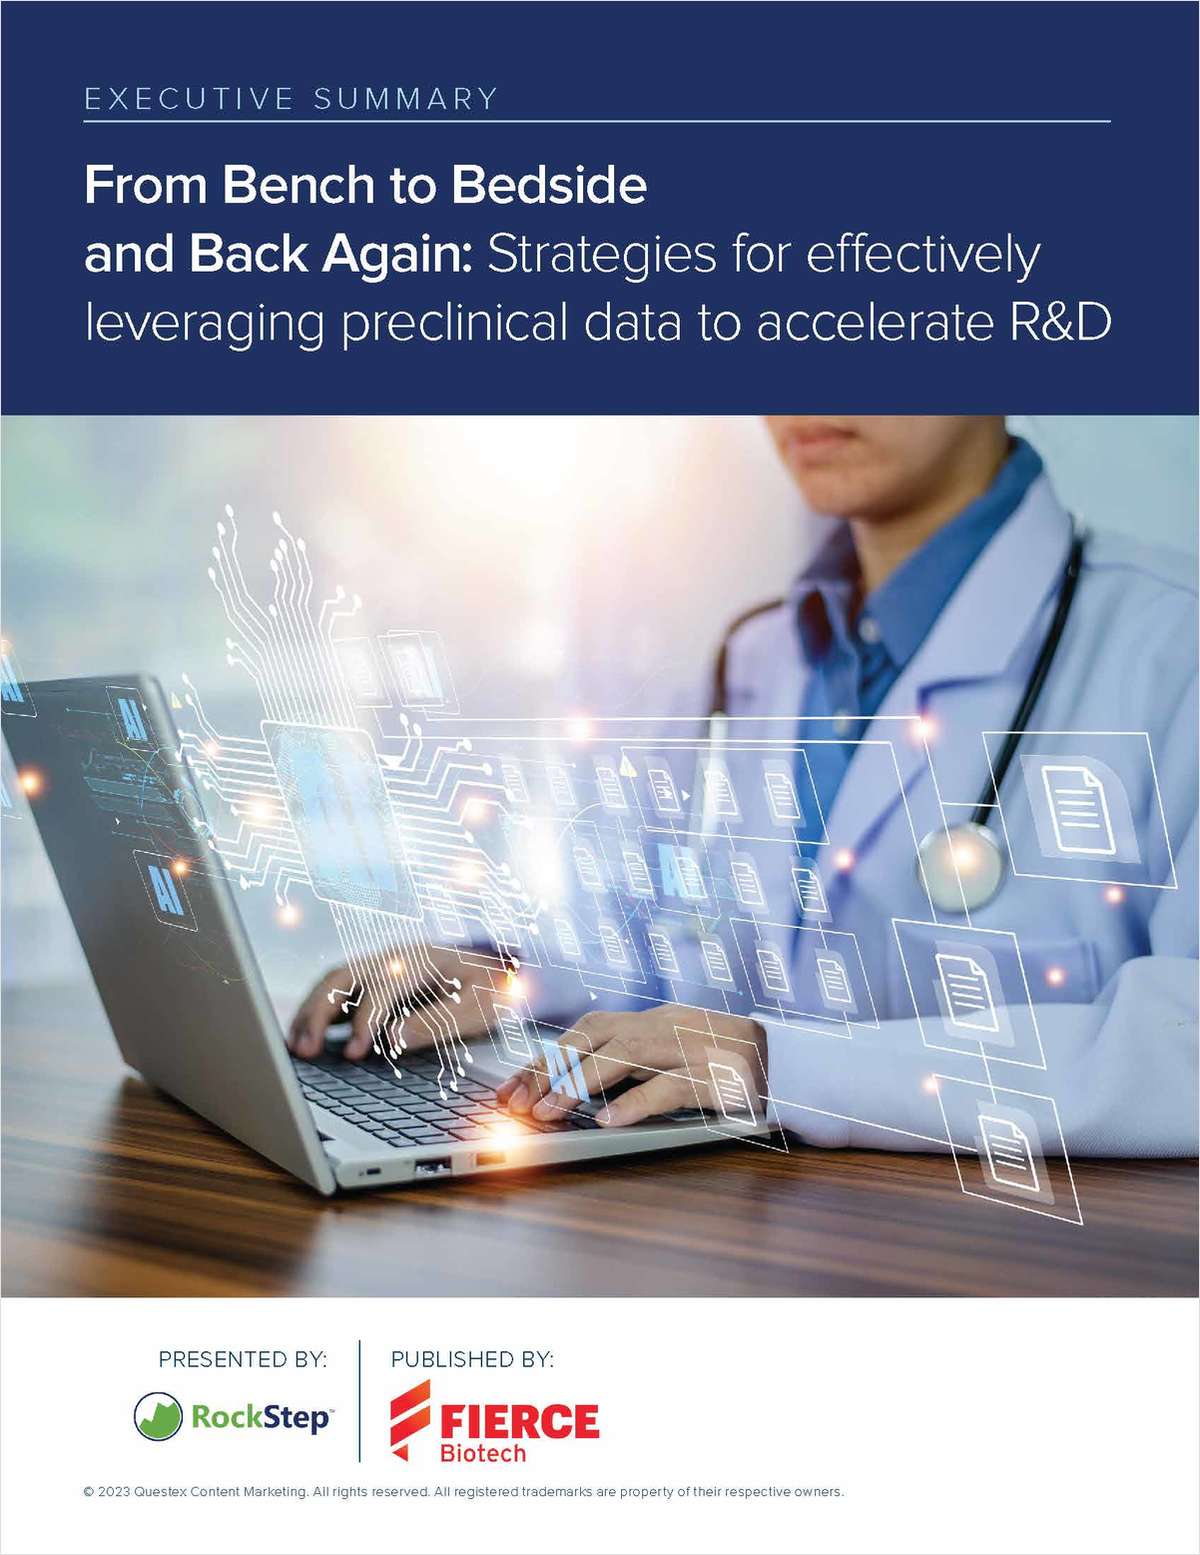 From Bench to Bedside and Back Again: Strategies for effectively leveraging preclinical data to accelerate